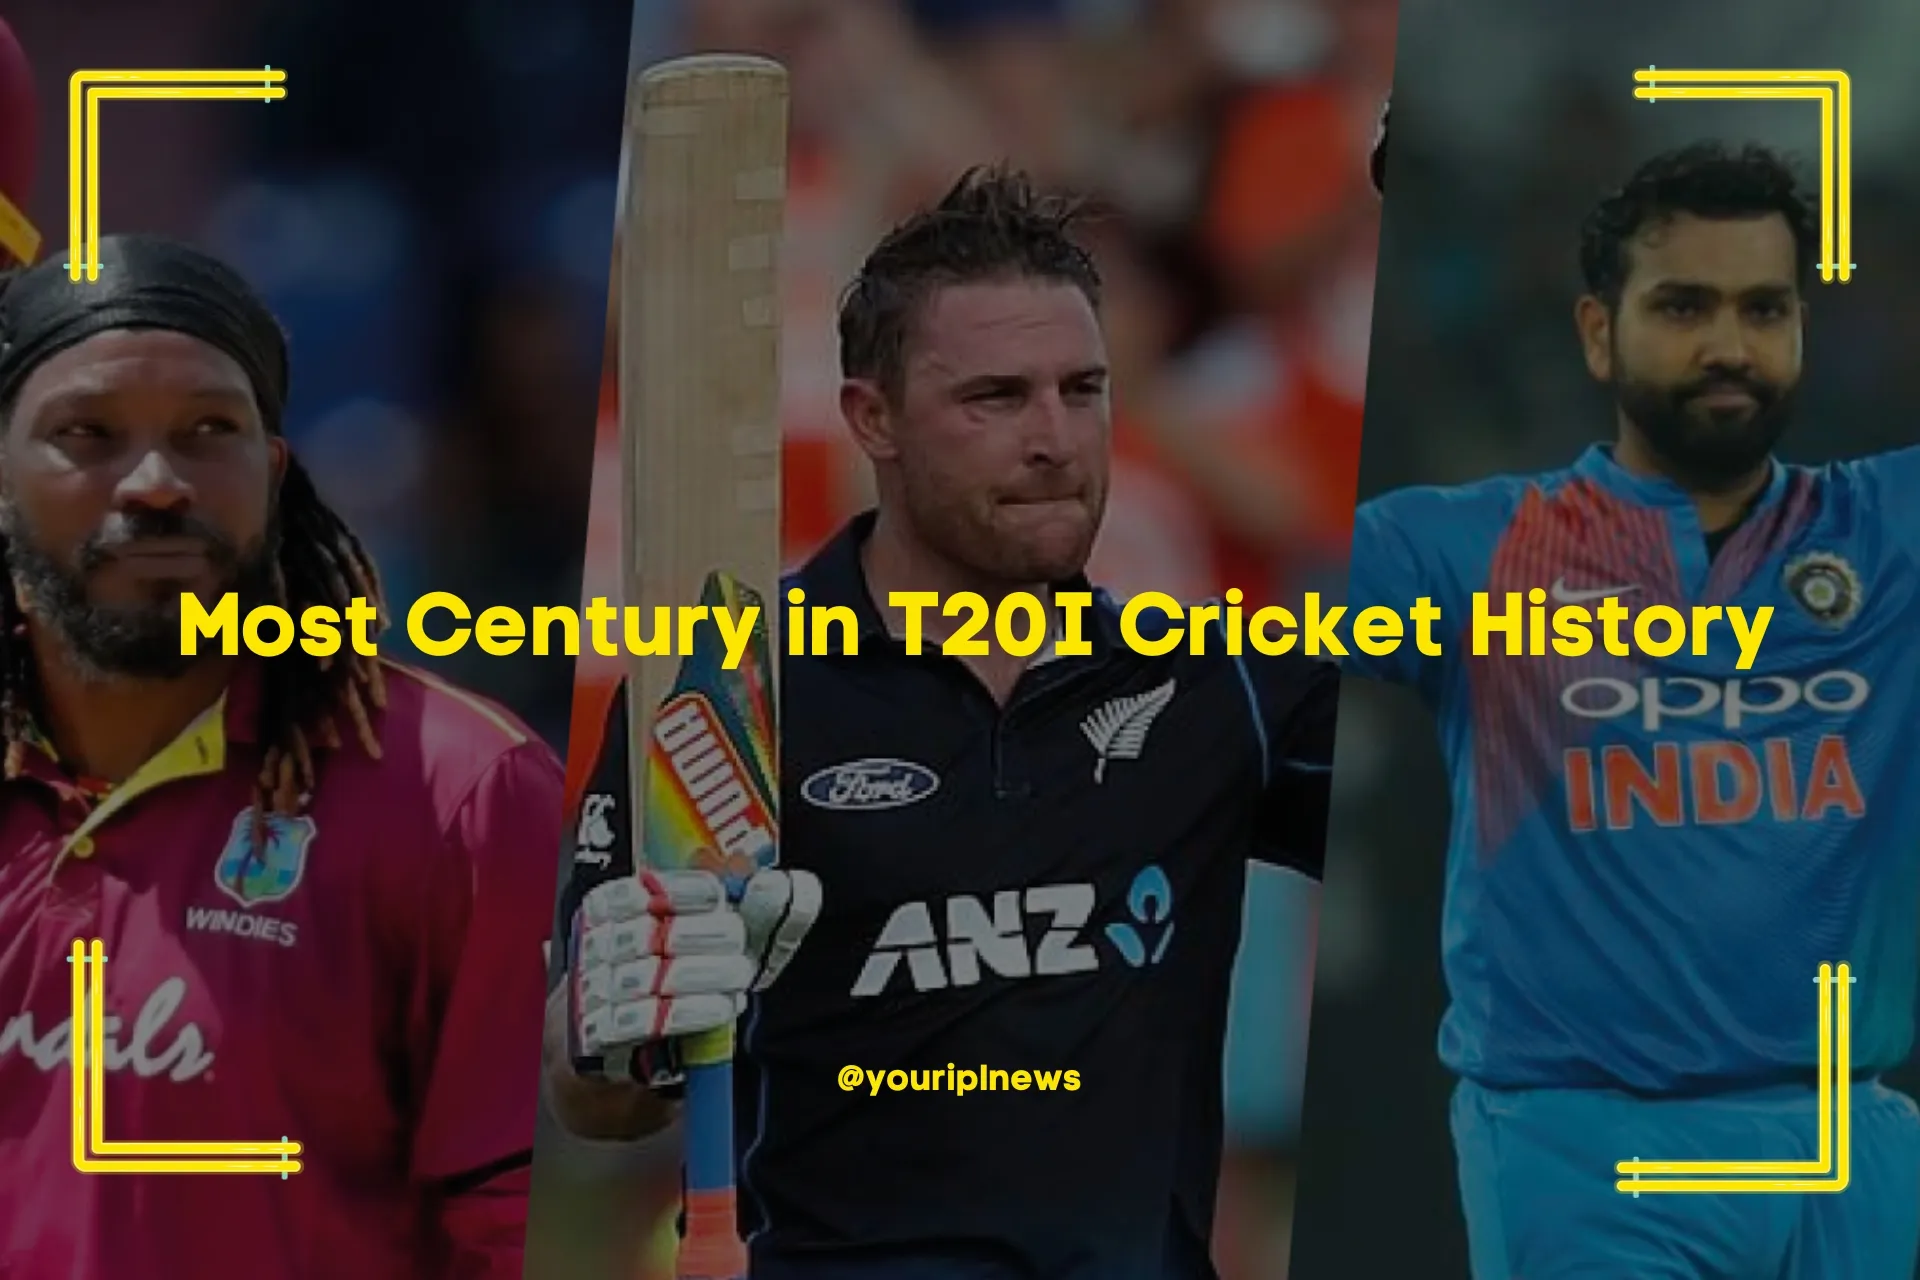 Most Century in T20I Cricket History